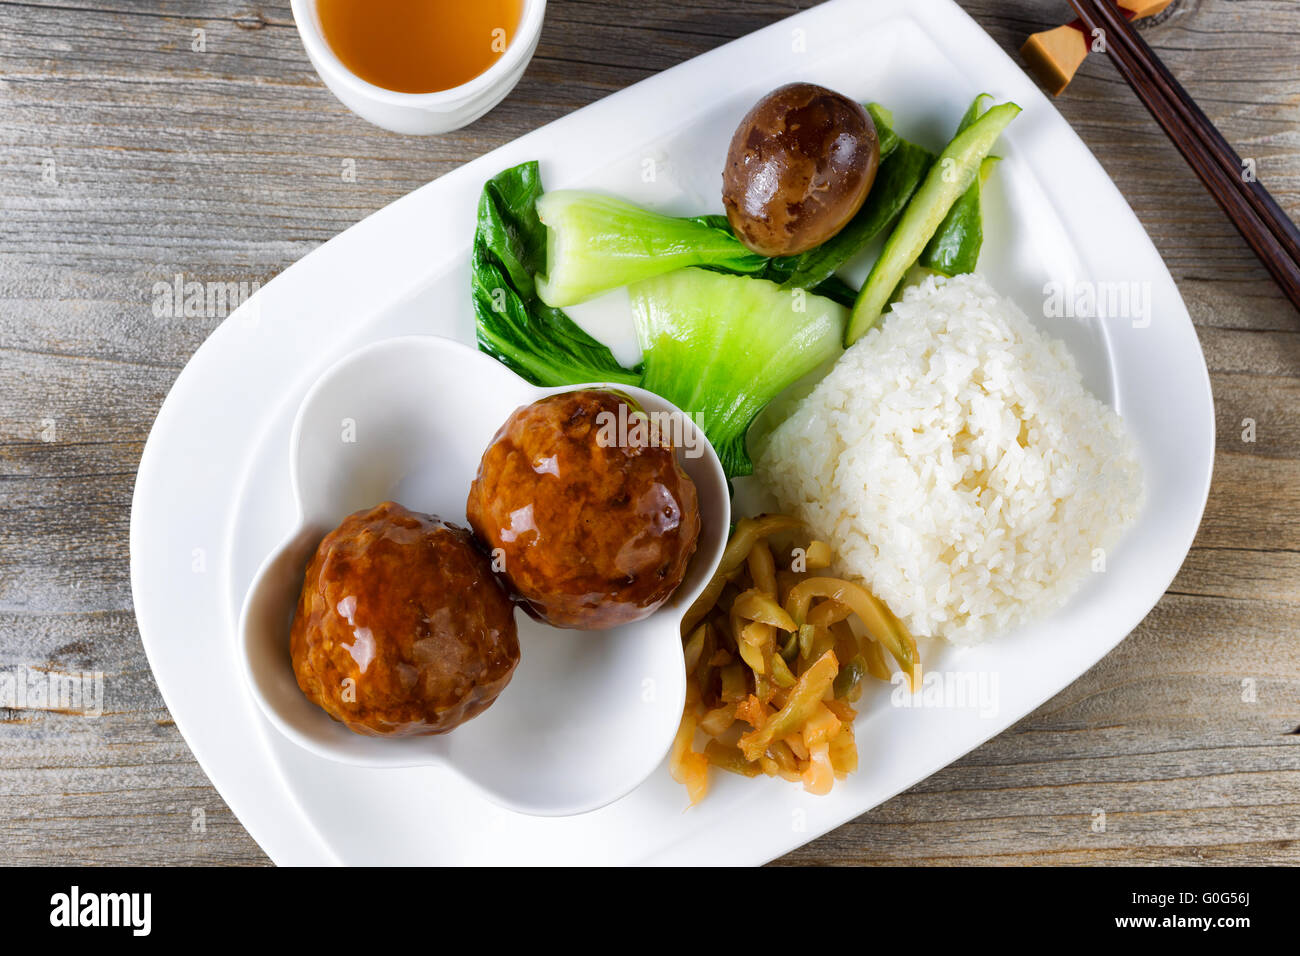 Saucy meatball dish in white plate ready to eat Stock Photo